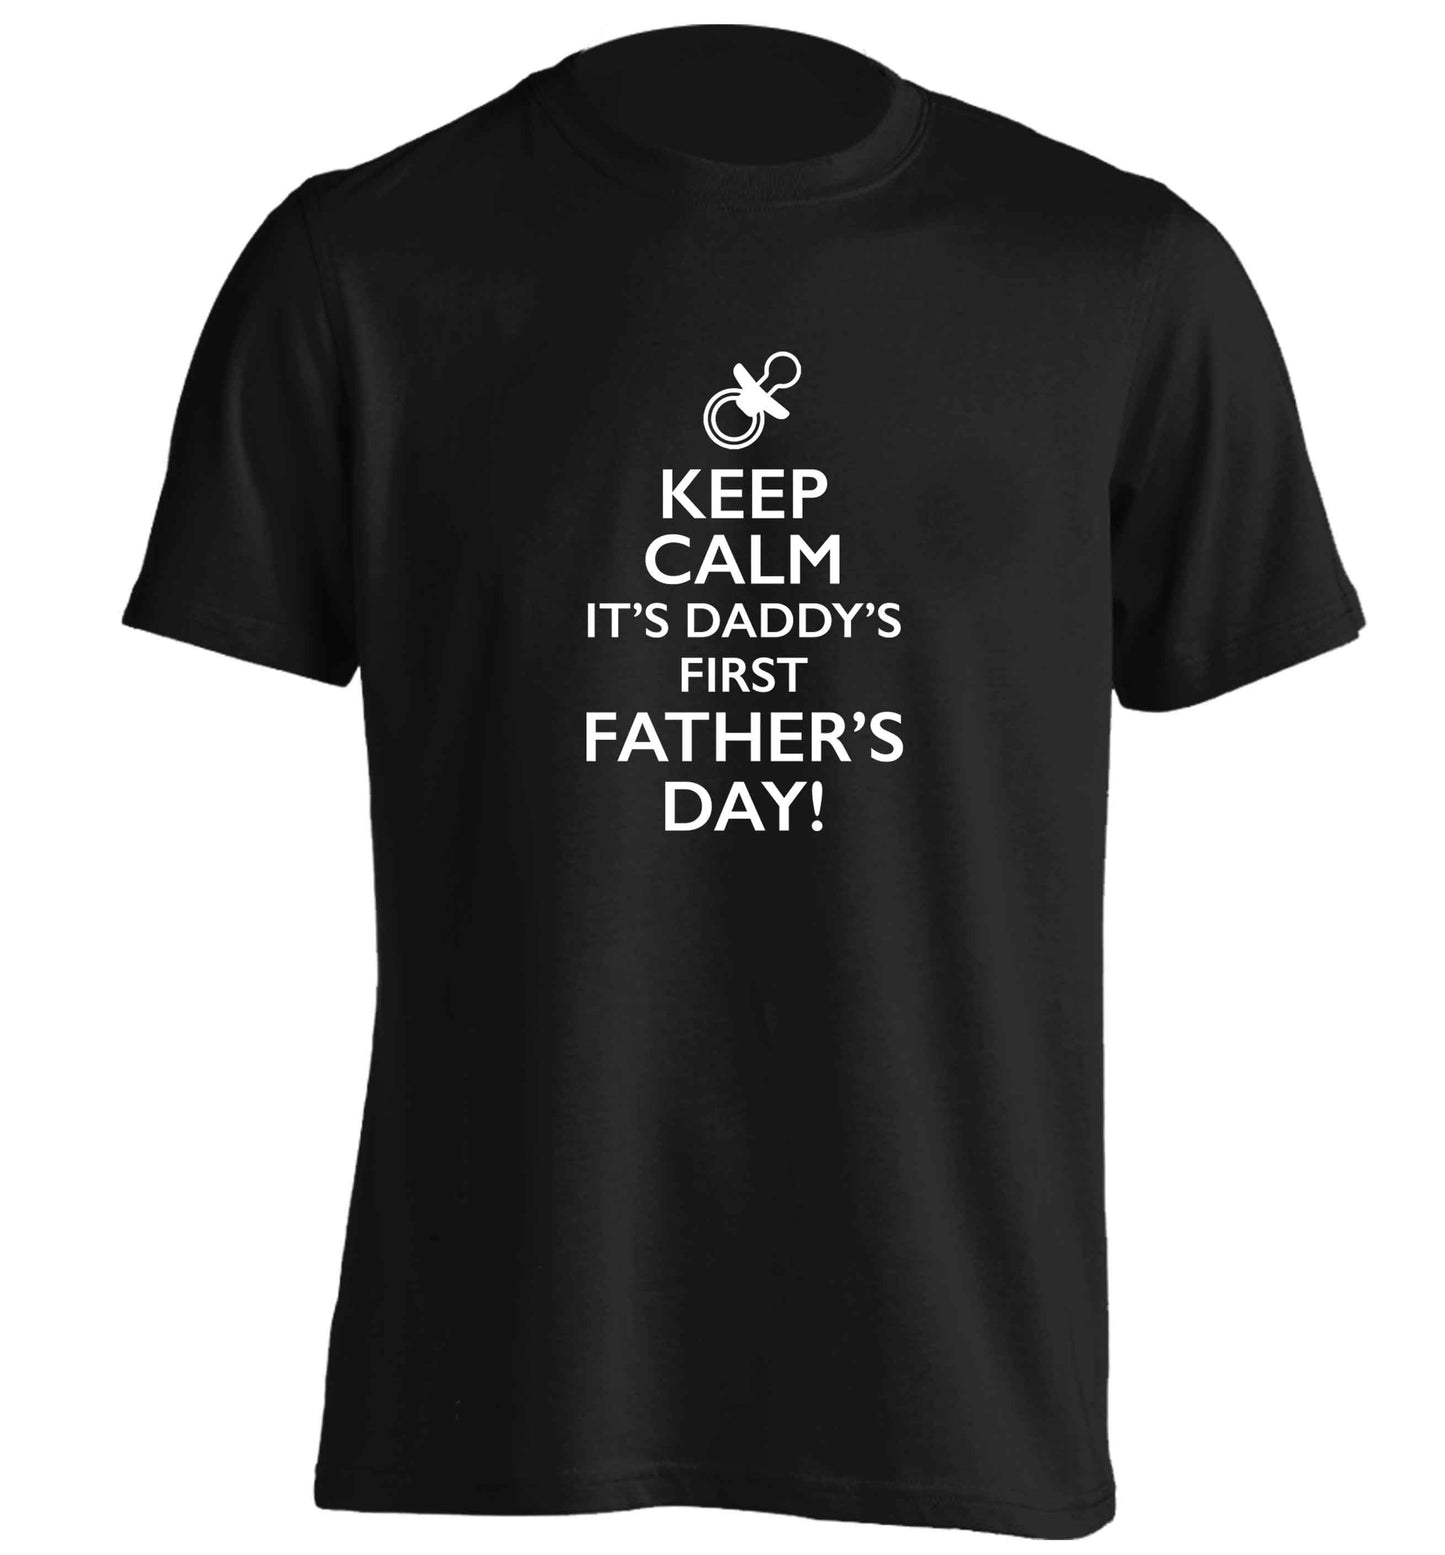 Keep calm it's daddys first father's day adults unisex black Tshirt 2XL